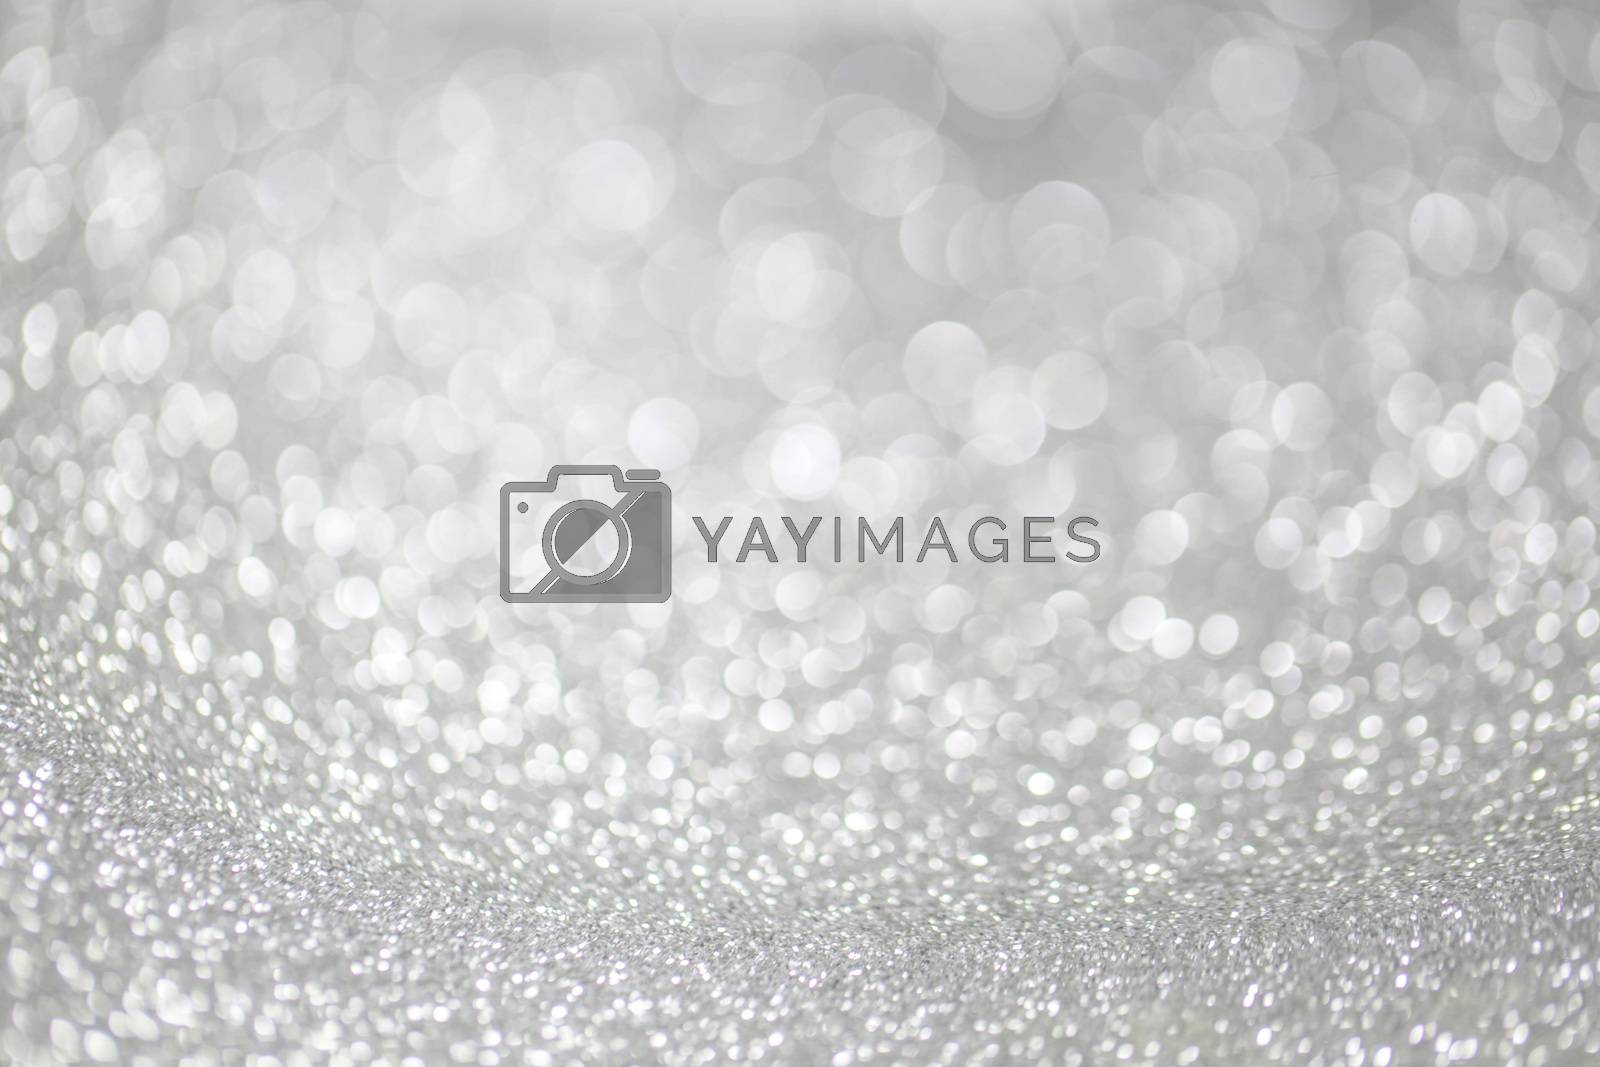 Royalty free image of Abstract silver glitter background by Yellowj